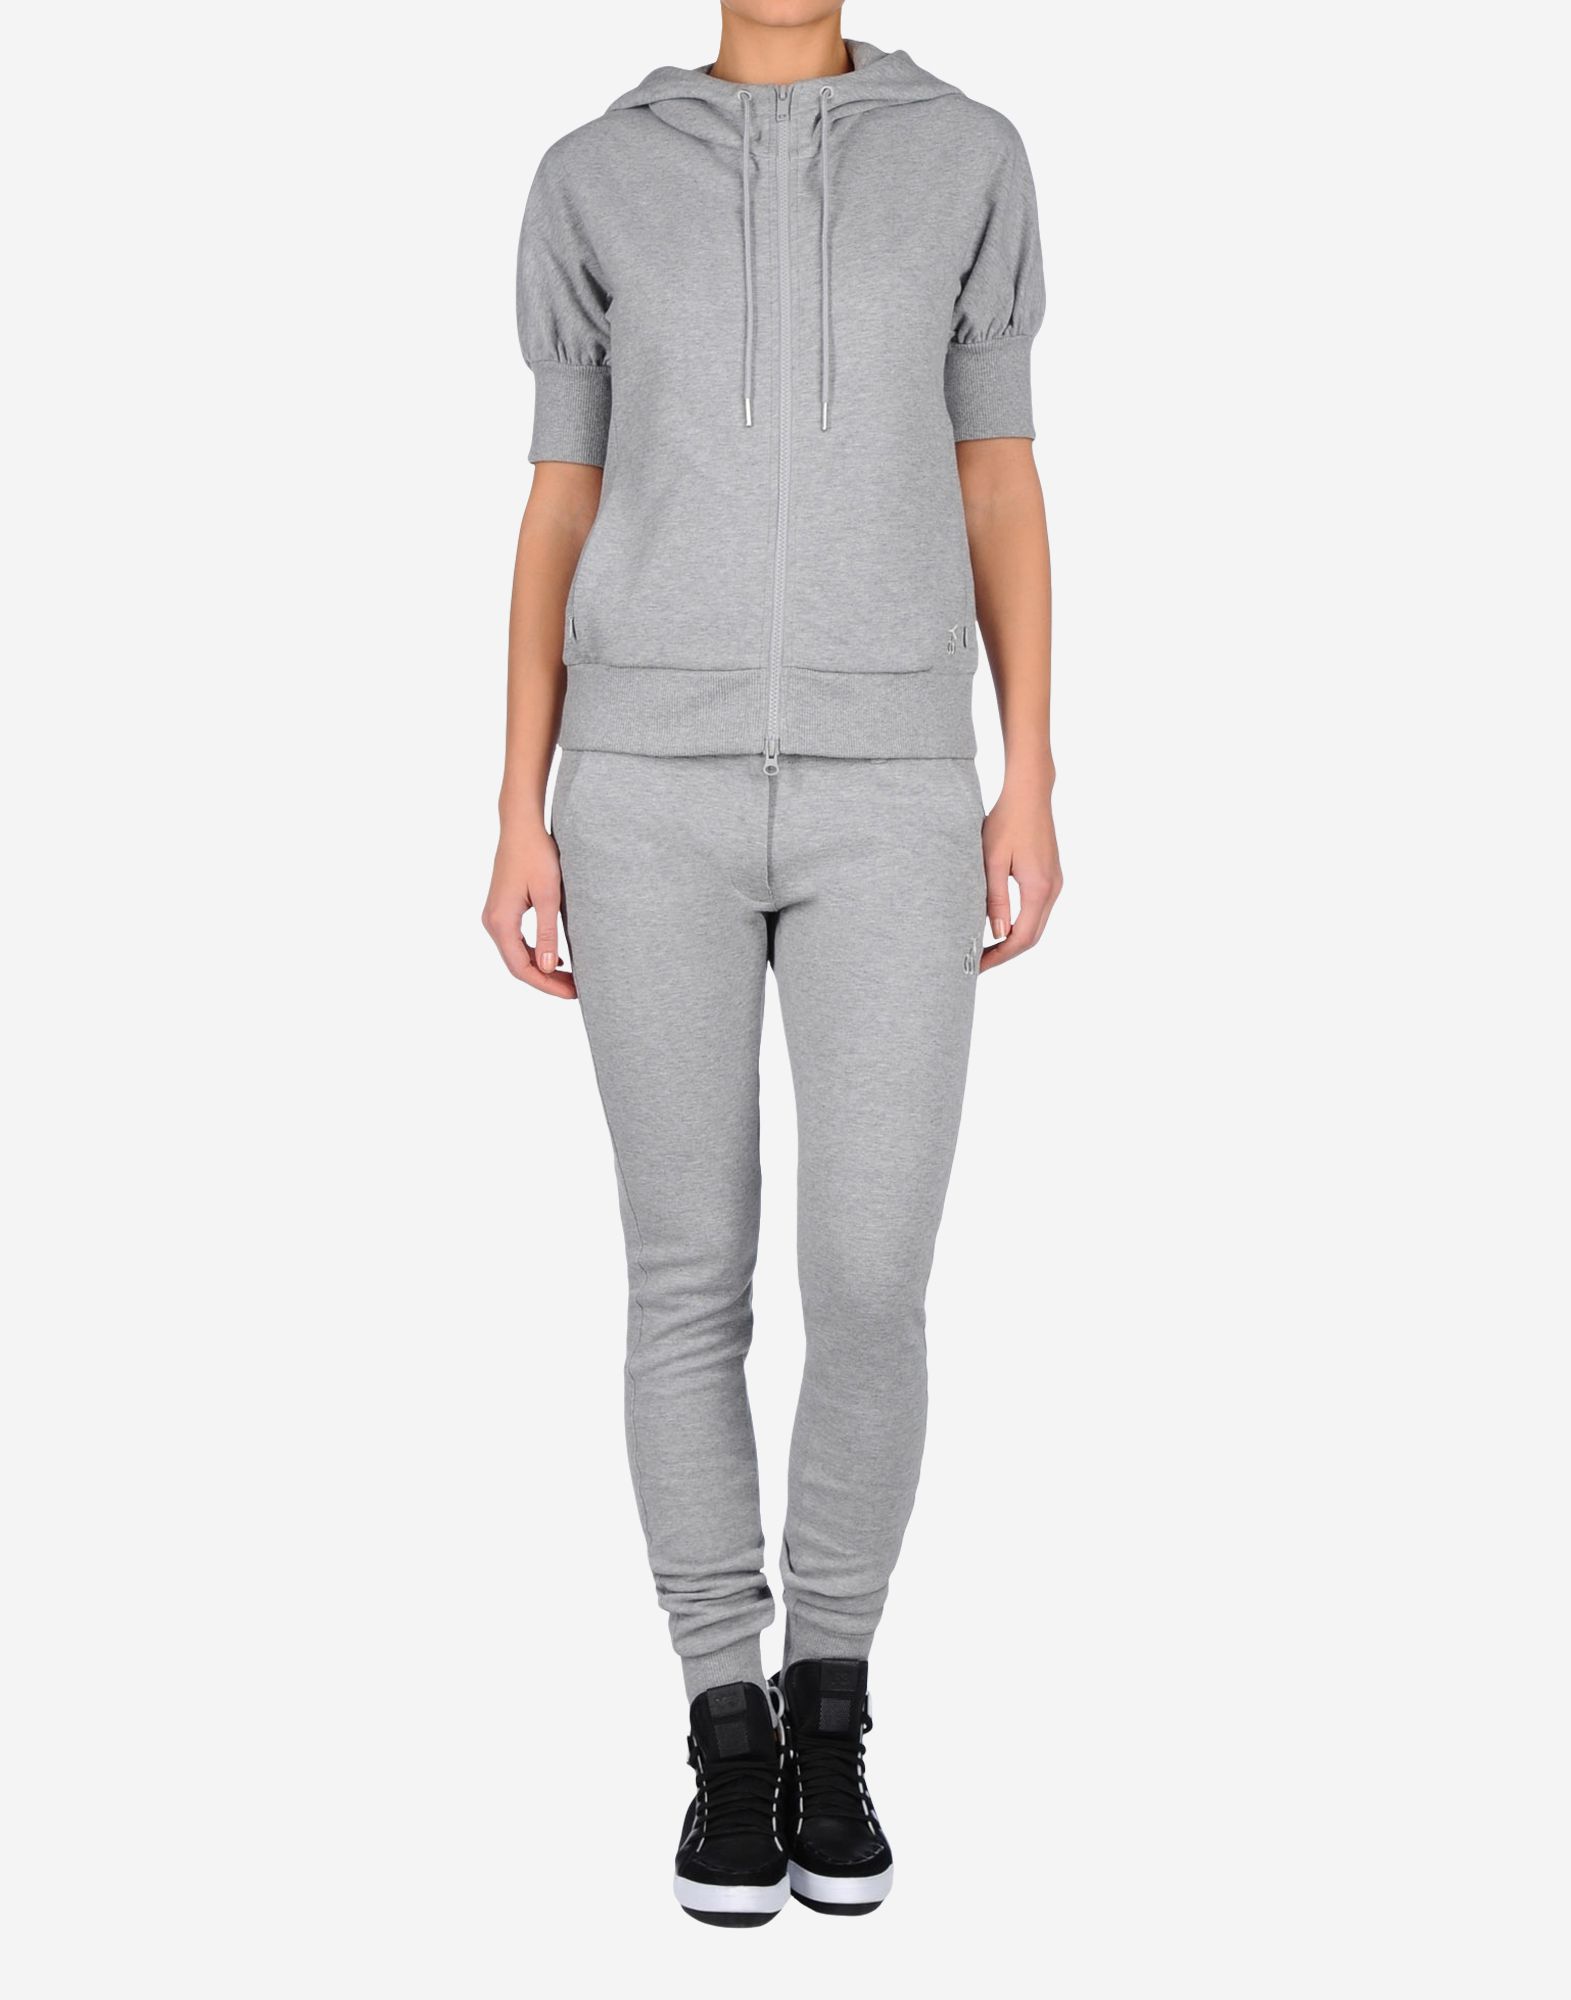 Y 3 Cuffed Track Pants for Women | Adidas Y-3 Official Store